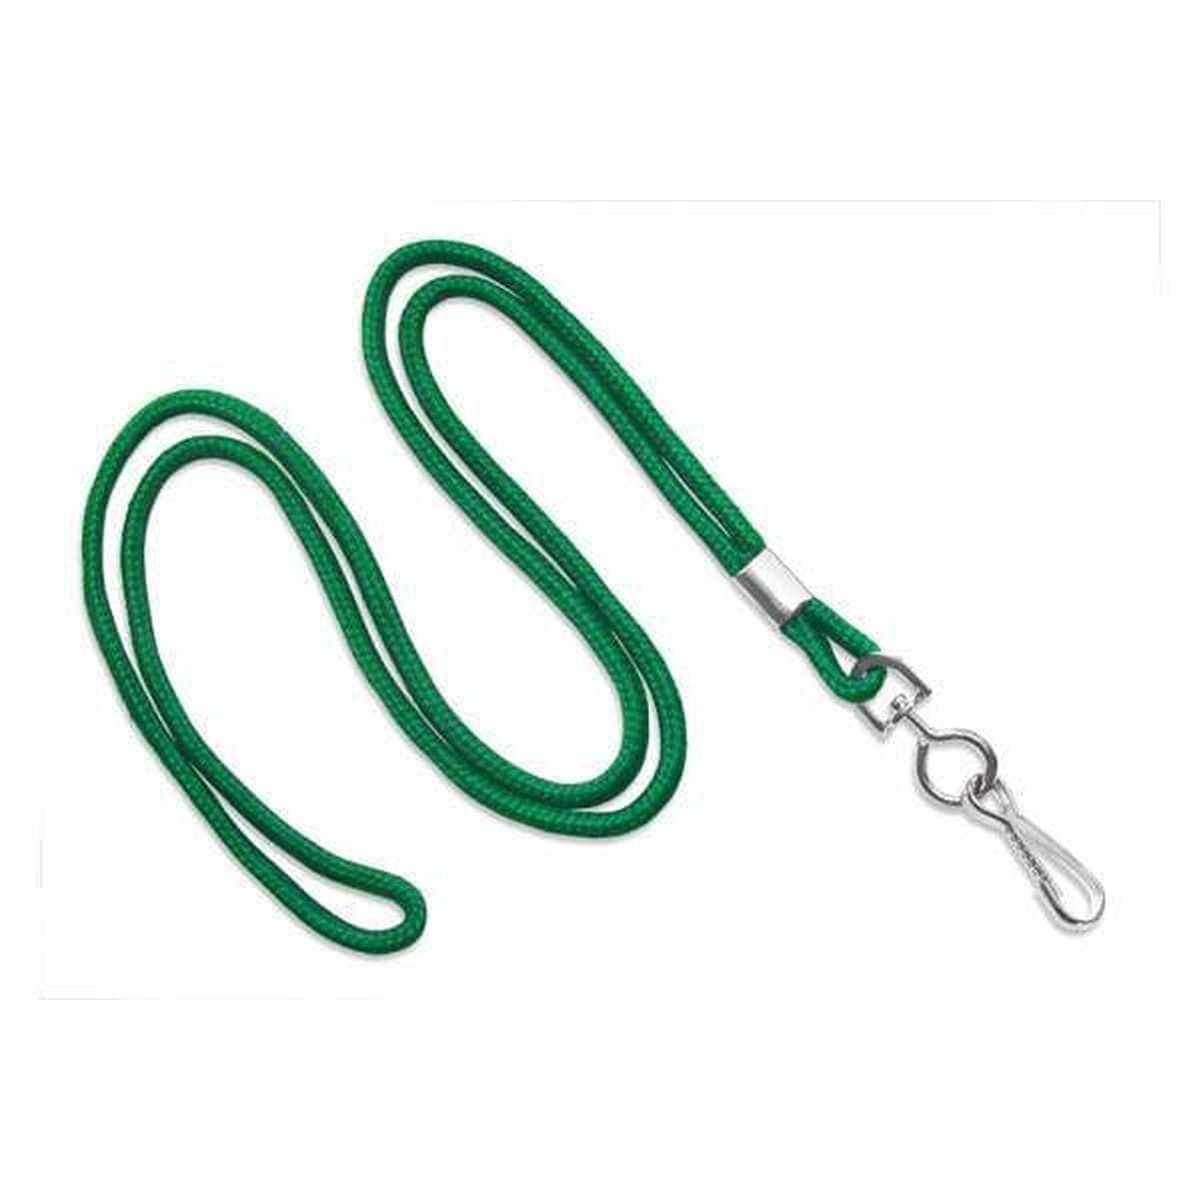 Green Round 1/8 Lanyard with Swivel Hook by Specialist ID, Sold Individually